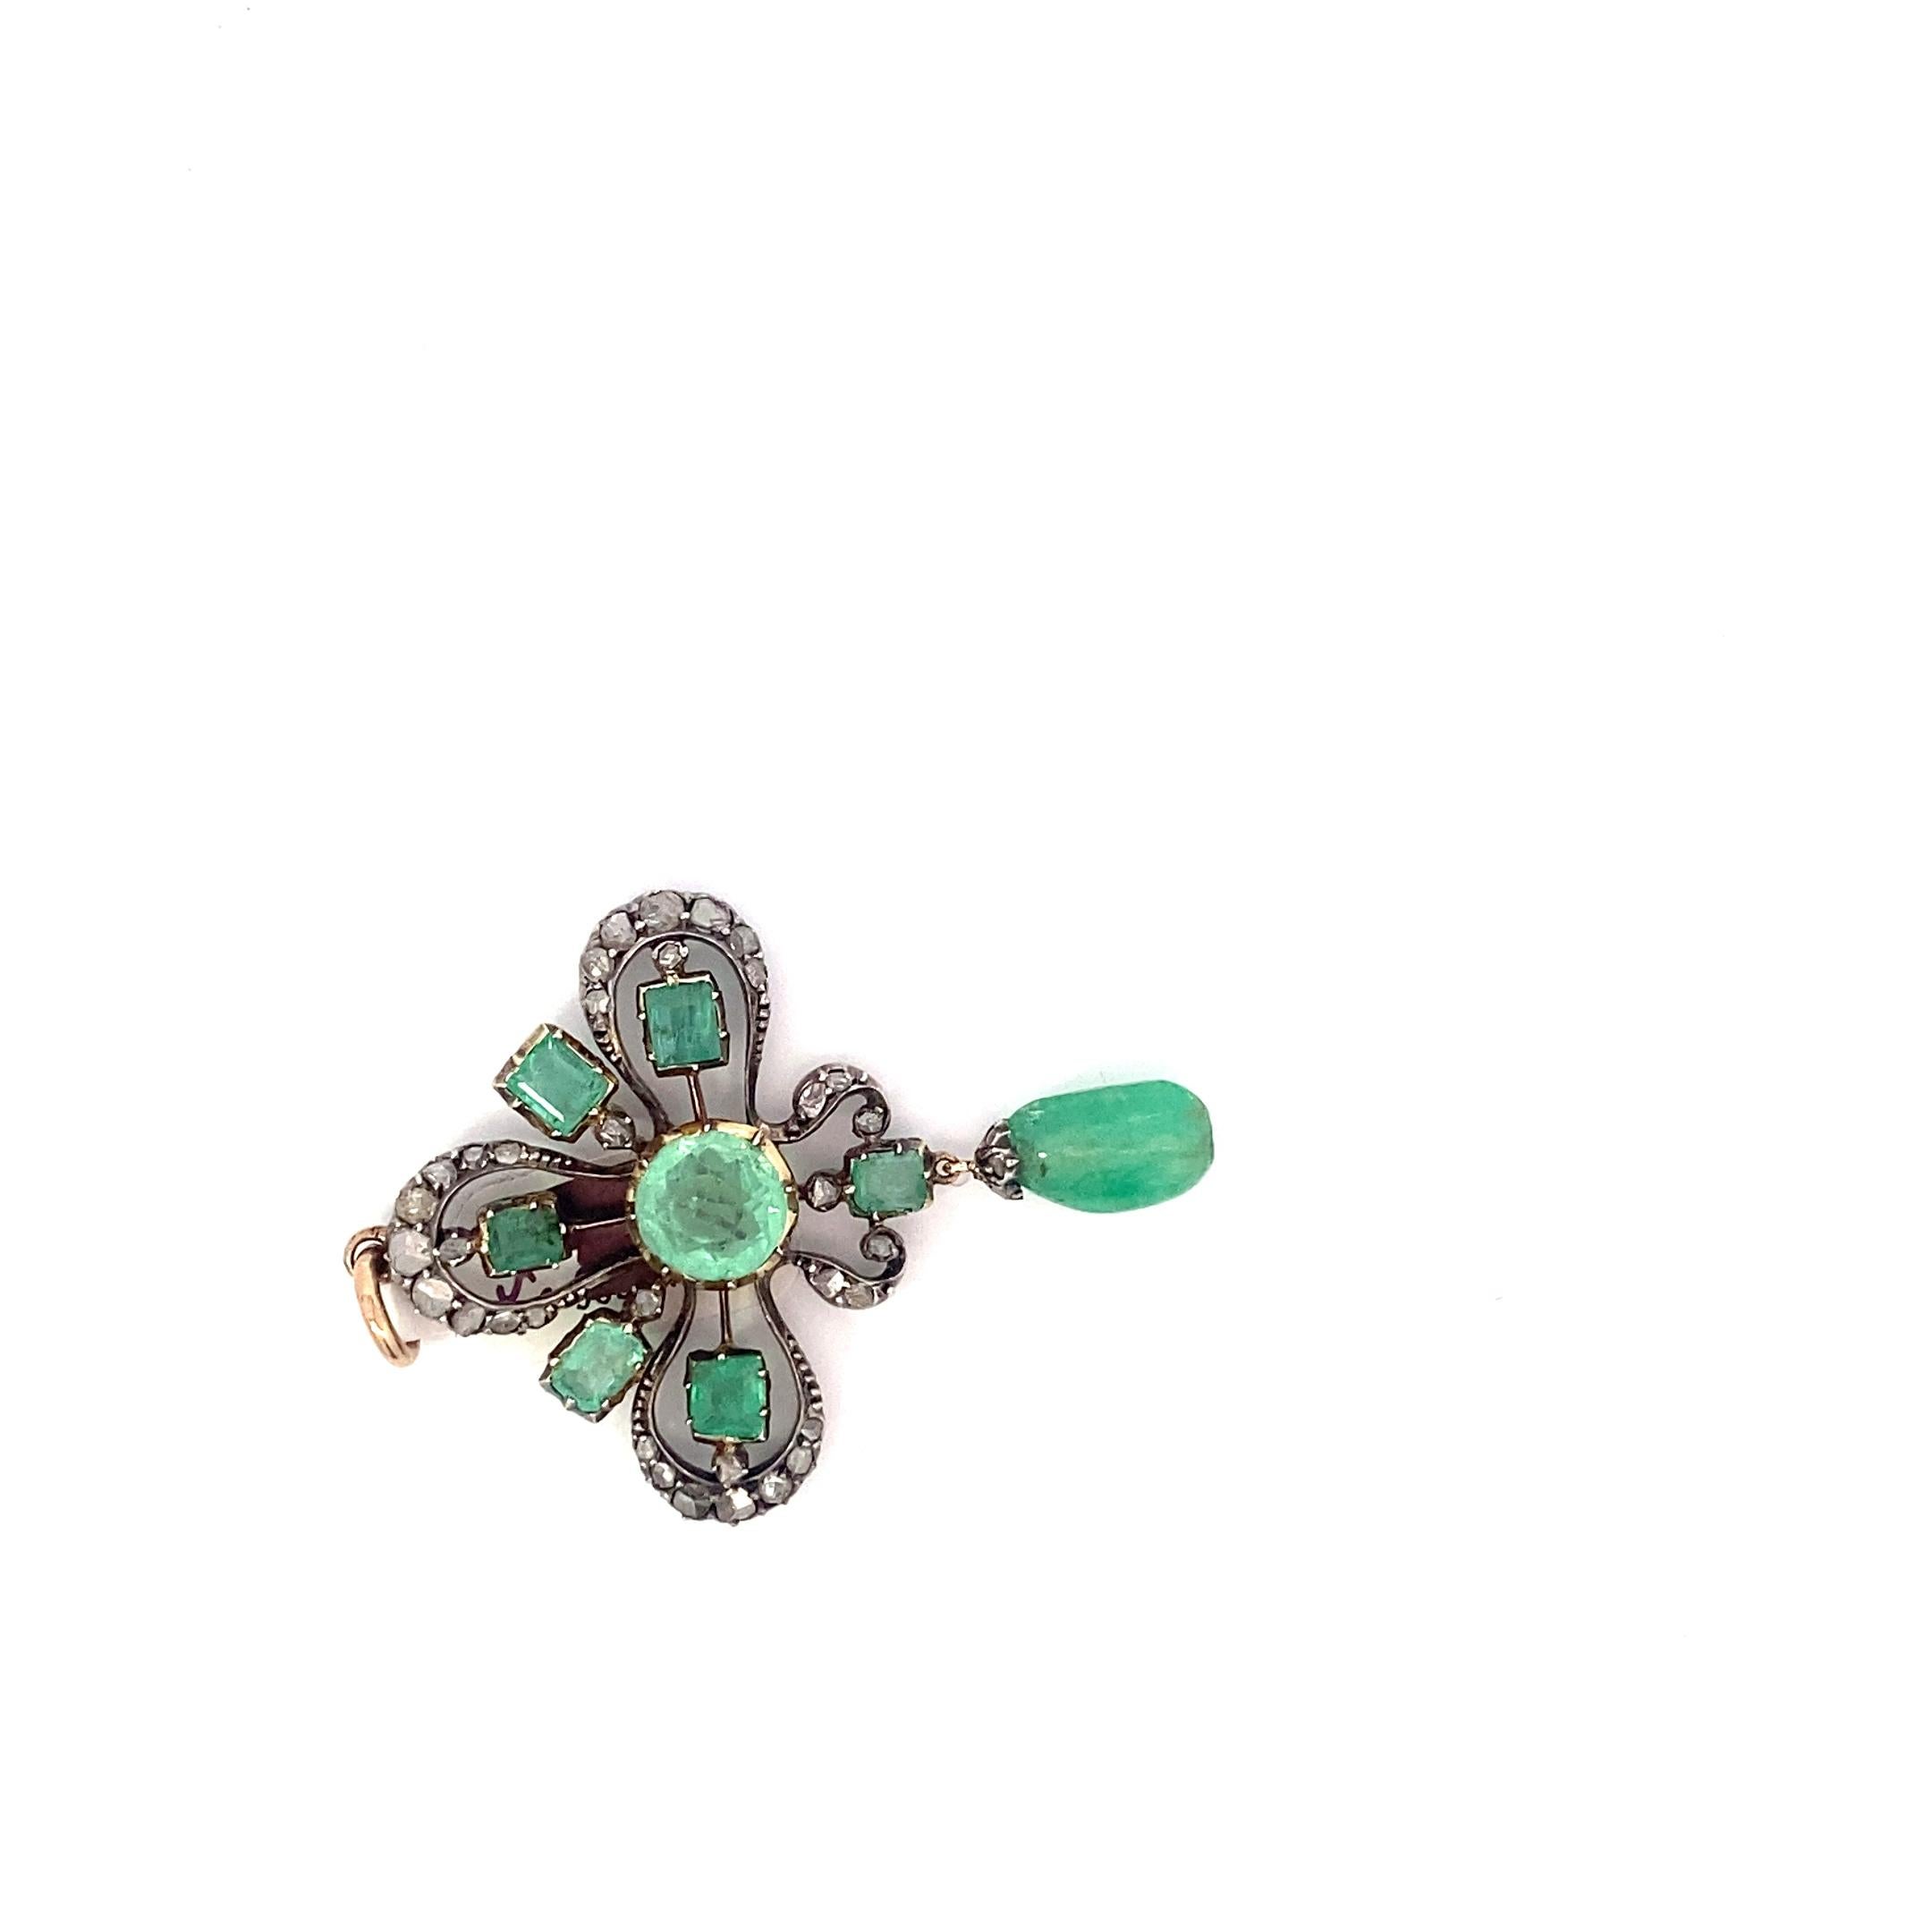 Incredible luscious Emerald forward pendant. This piece dates back to the late victorian period and features a large round emerald at the center surrounded by 6 smaller square emeralds as well as a border of rose cut diamonds between 2 and 4mms. The